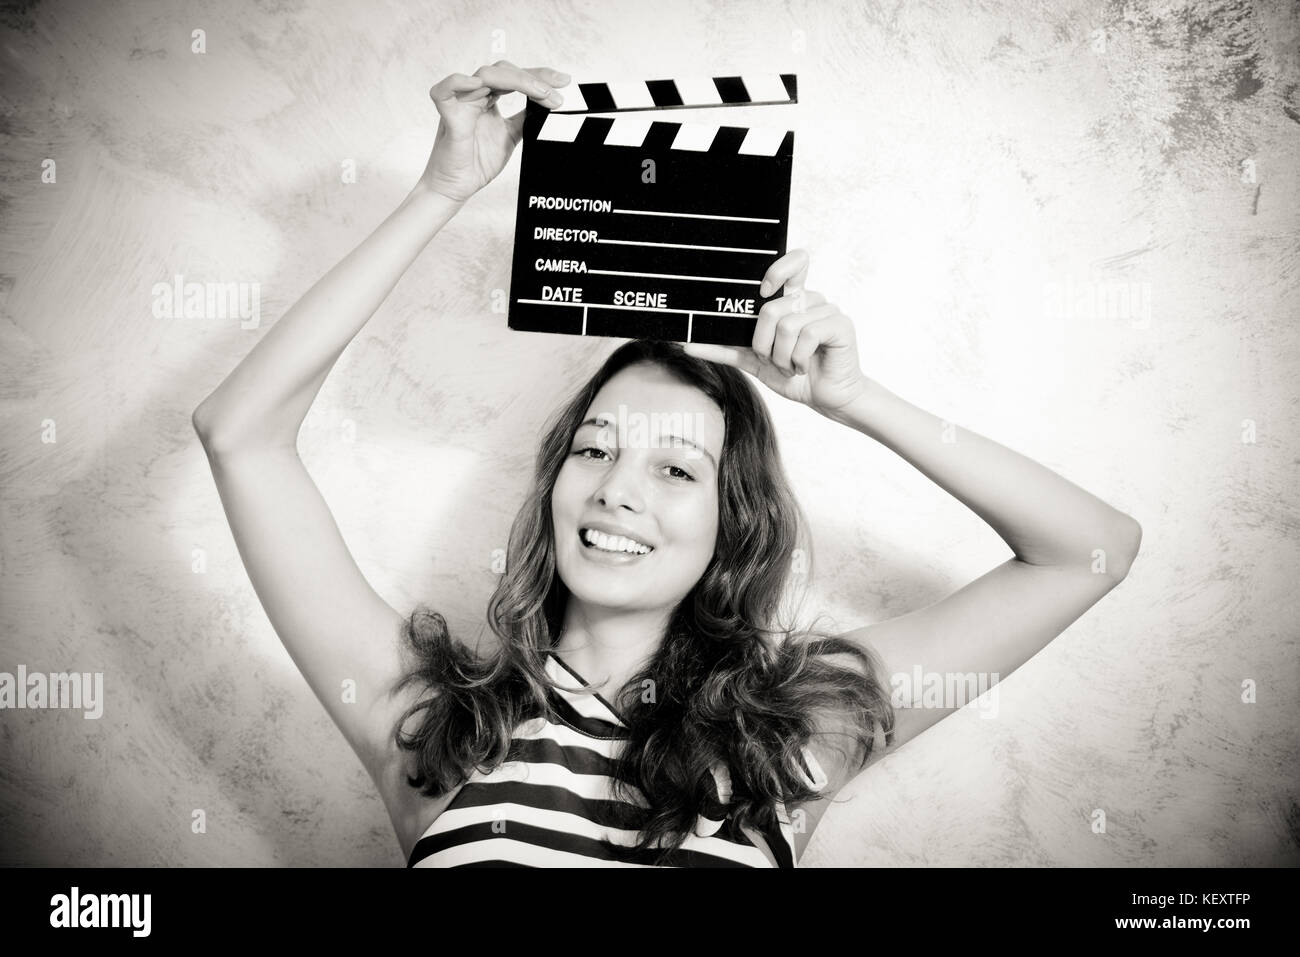 Young smiling woman actress portrait posing for audition black and white Stock Photo